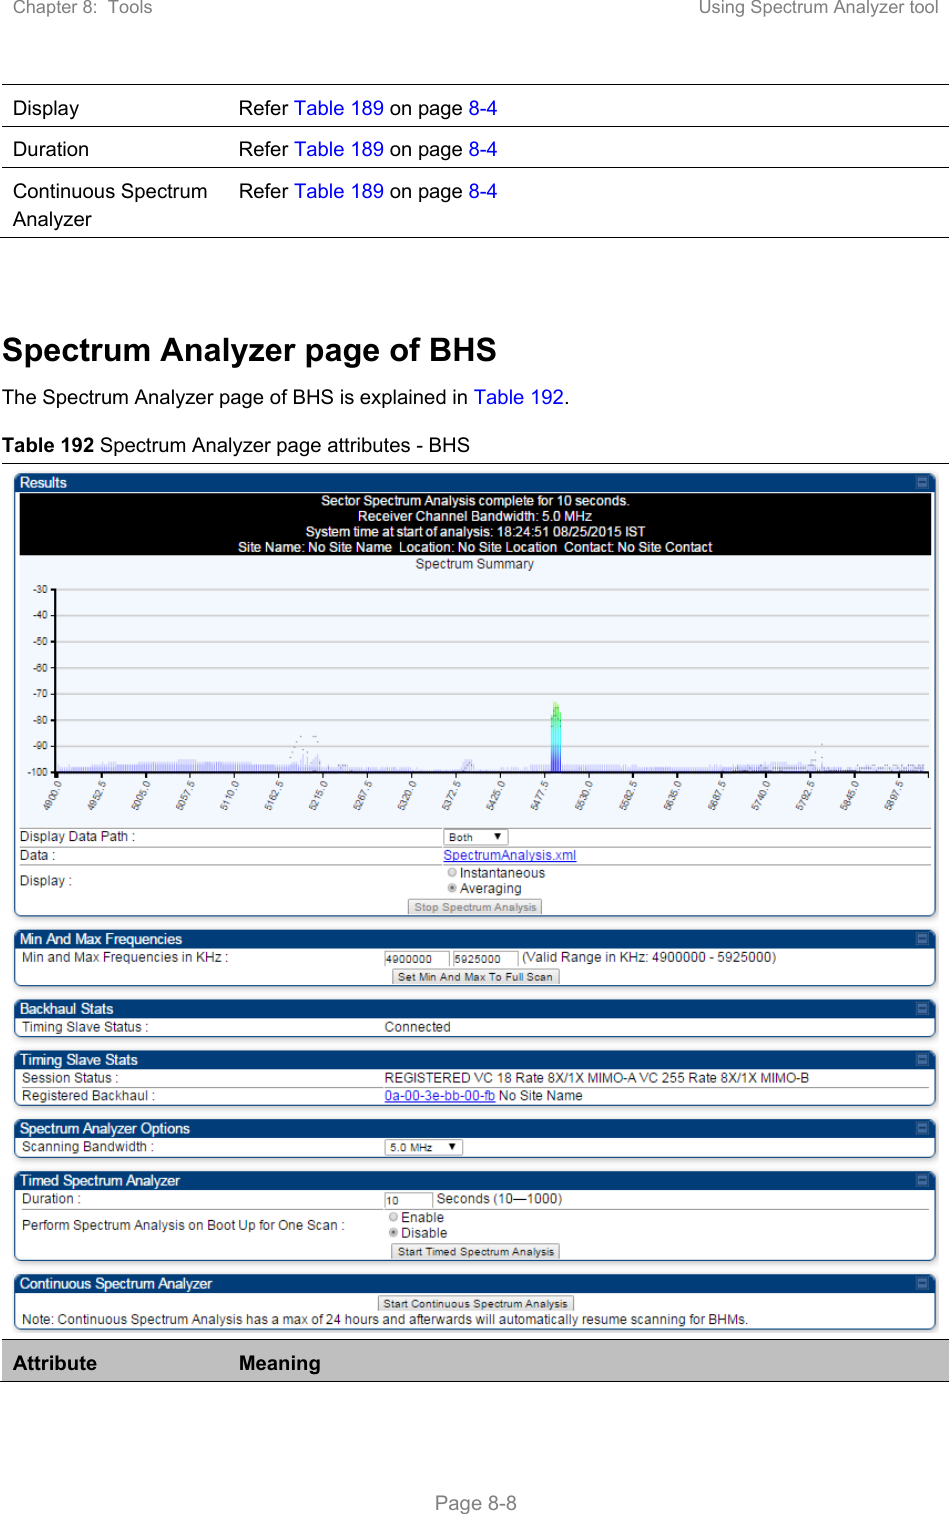 Chapter 8:  Tools  Using Spectrum Analyzer tool   Page 8-8 Display  Refer Table 189 on page 8-4 Duration   Refer Table 189 on page 8-4 Continuous Spectrum Analyzer Refer Table 189 on page 8-4   Spectrum Analyzer page of BHS The Spectrum Analyzer page of BHS is explained in Table 192. Table 192 Spectrum Analyzer page attributes - BHS Attribute  Meaning 